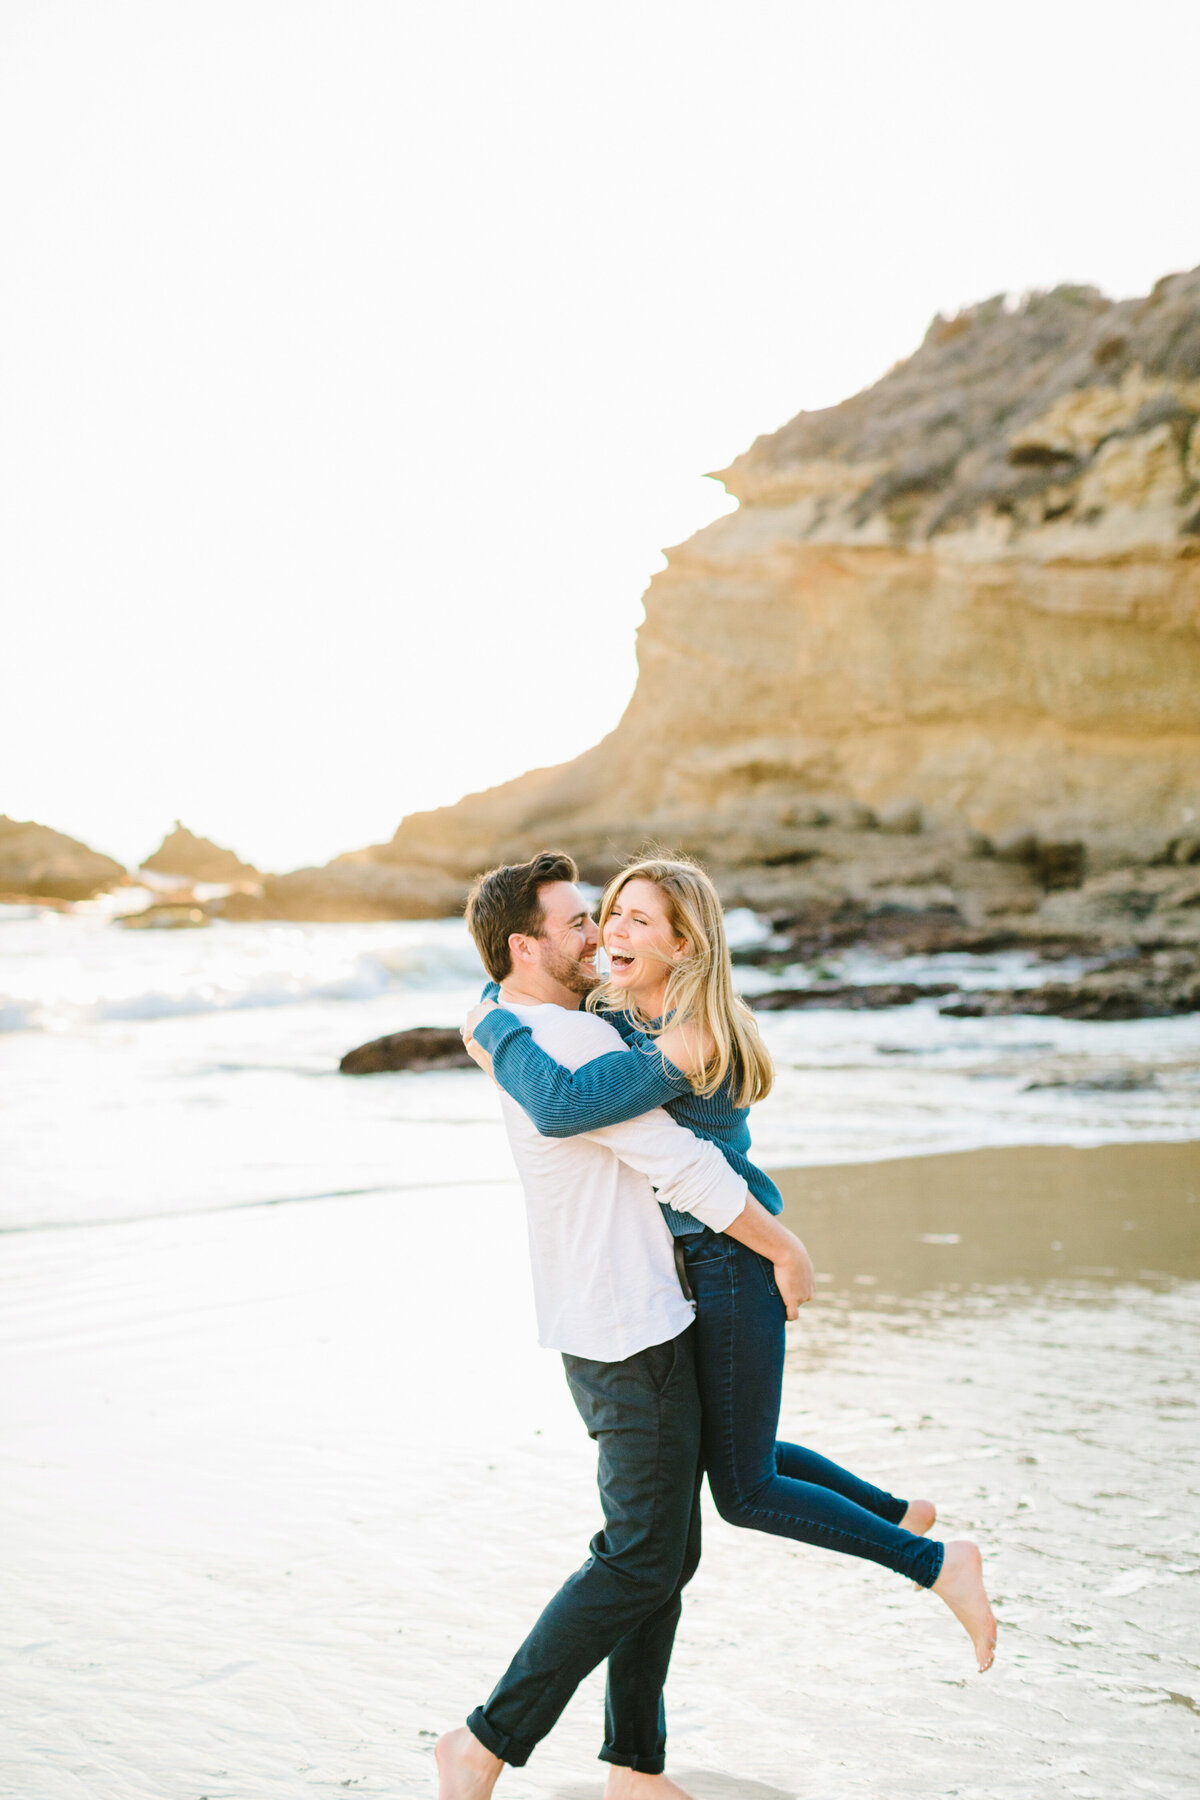 Best California and Texas Engagement Photographer-Jodee Debes Photography-149